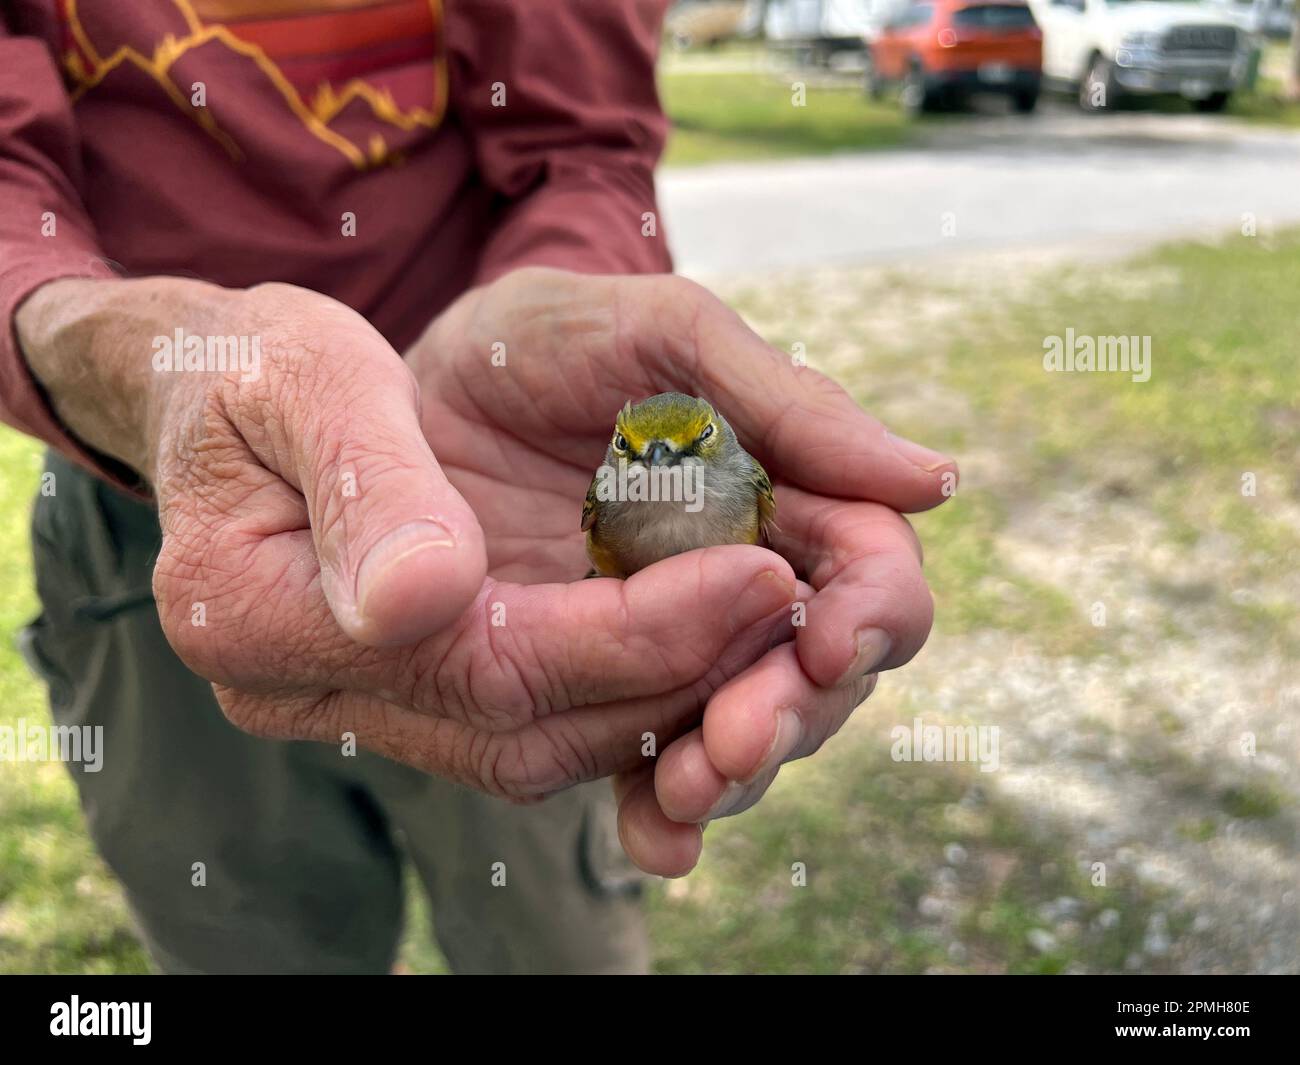 A fledging bird is helped by a senior man and his helping hands. Stock Photo